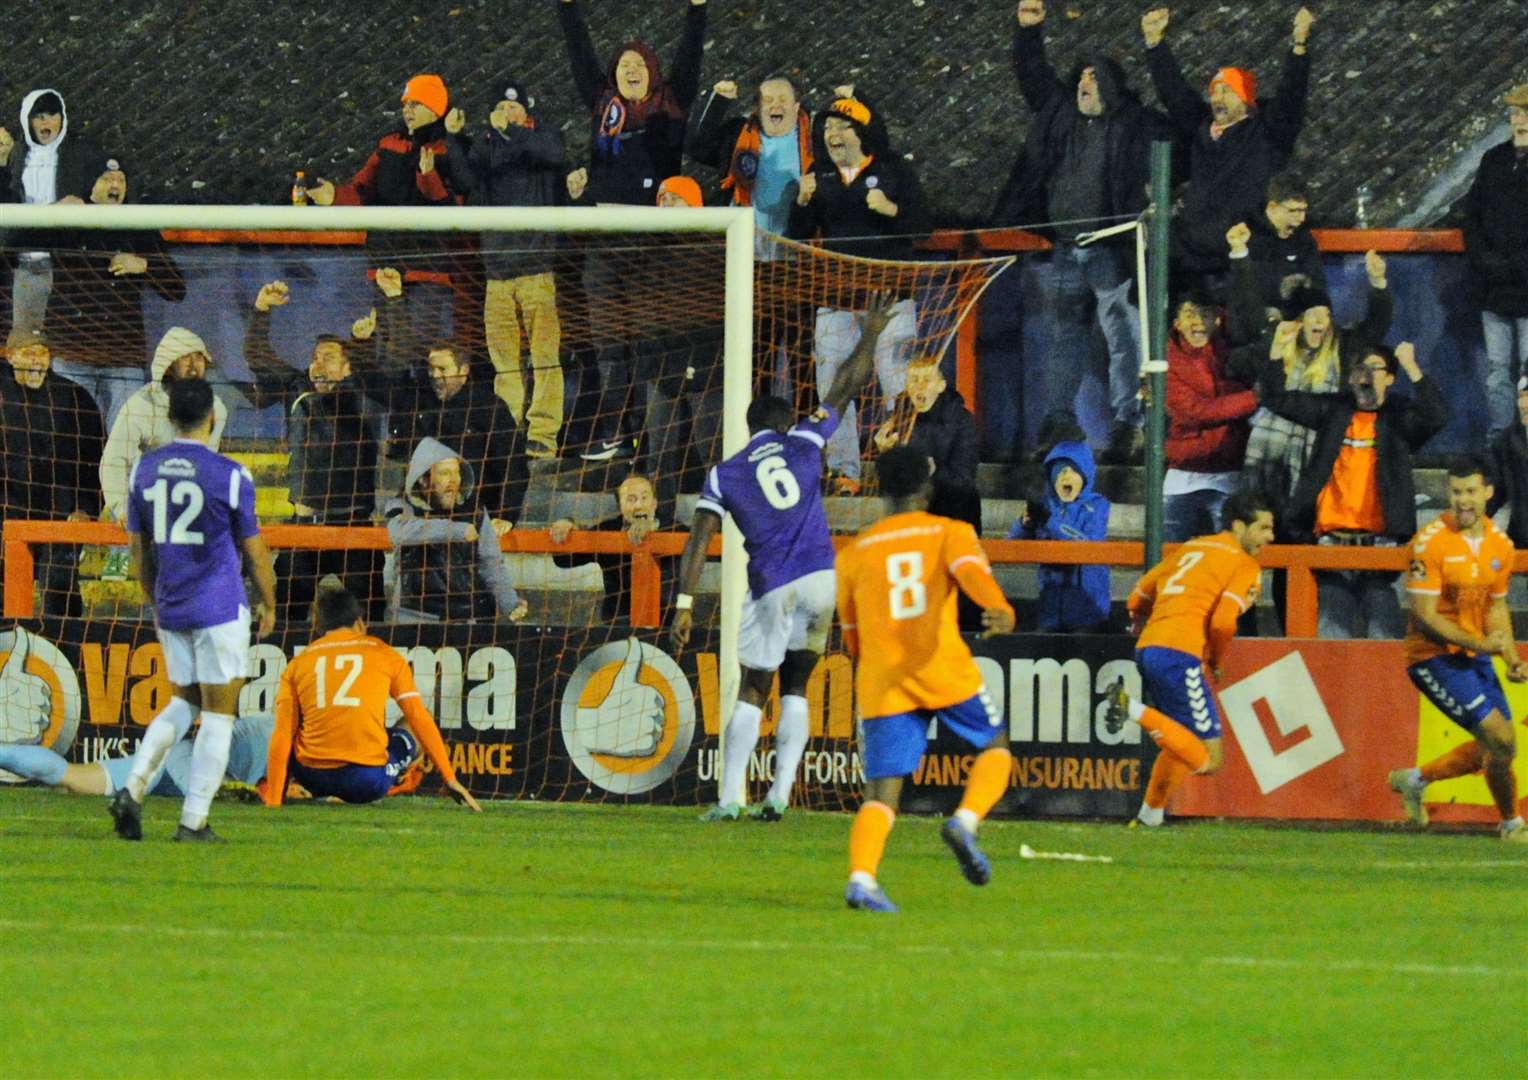 Emotions were running high after Braintree's late equaliser Picture: Steve Terrell